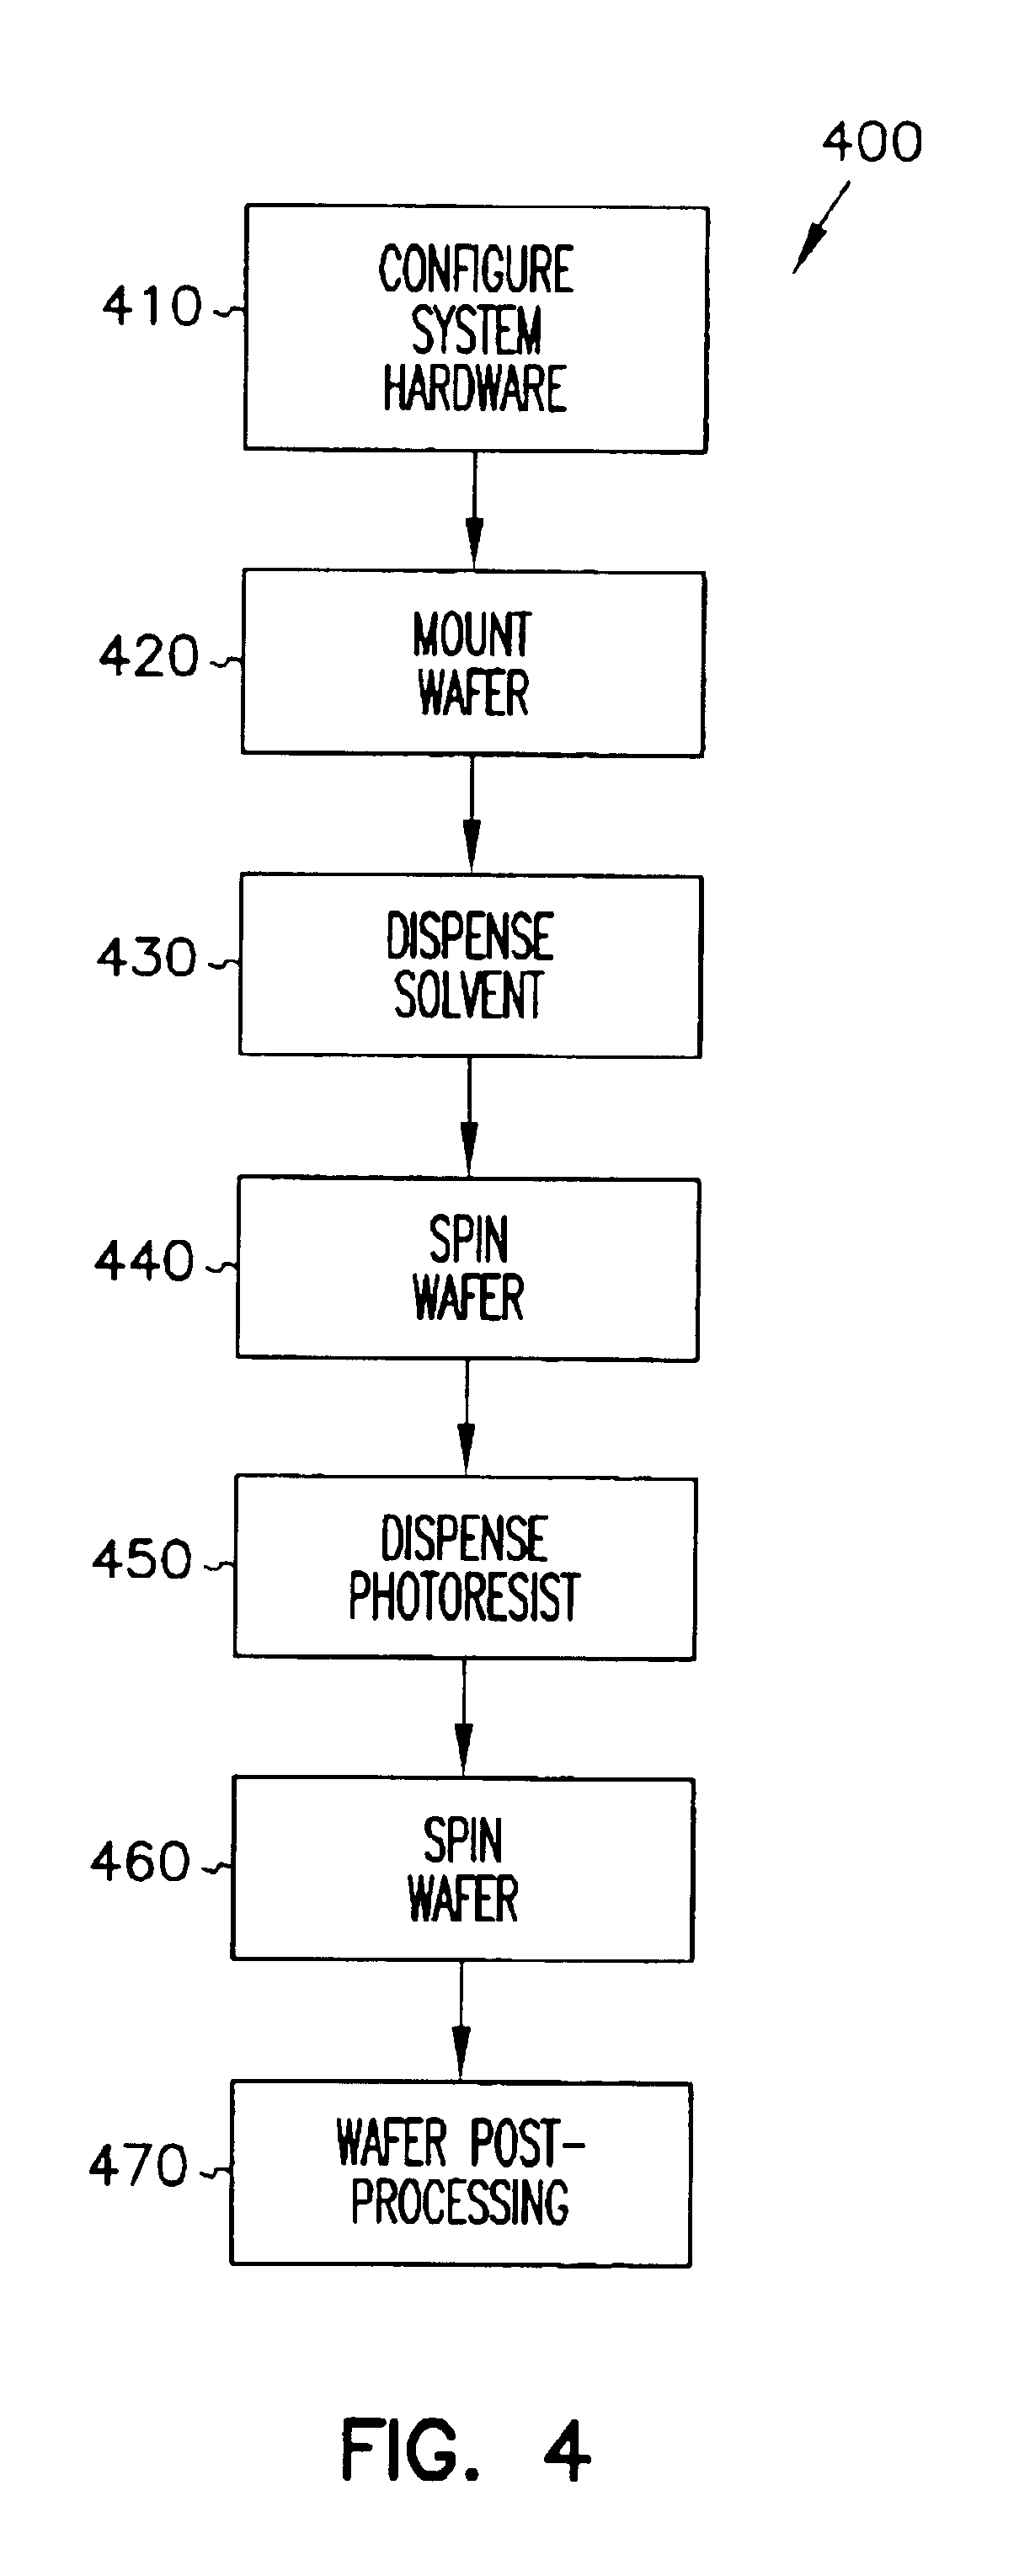 Solvent prewet and method to dispense the solvent prewet